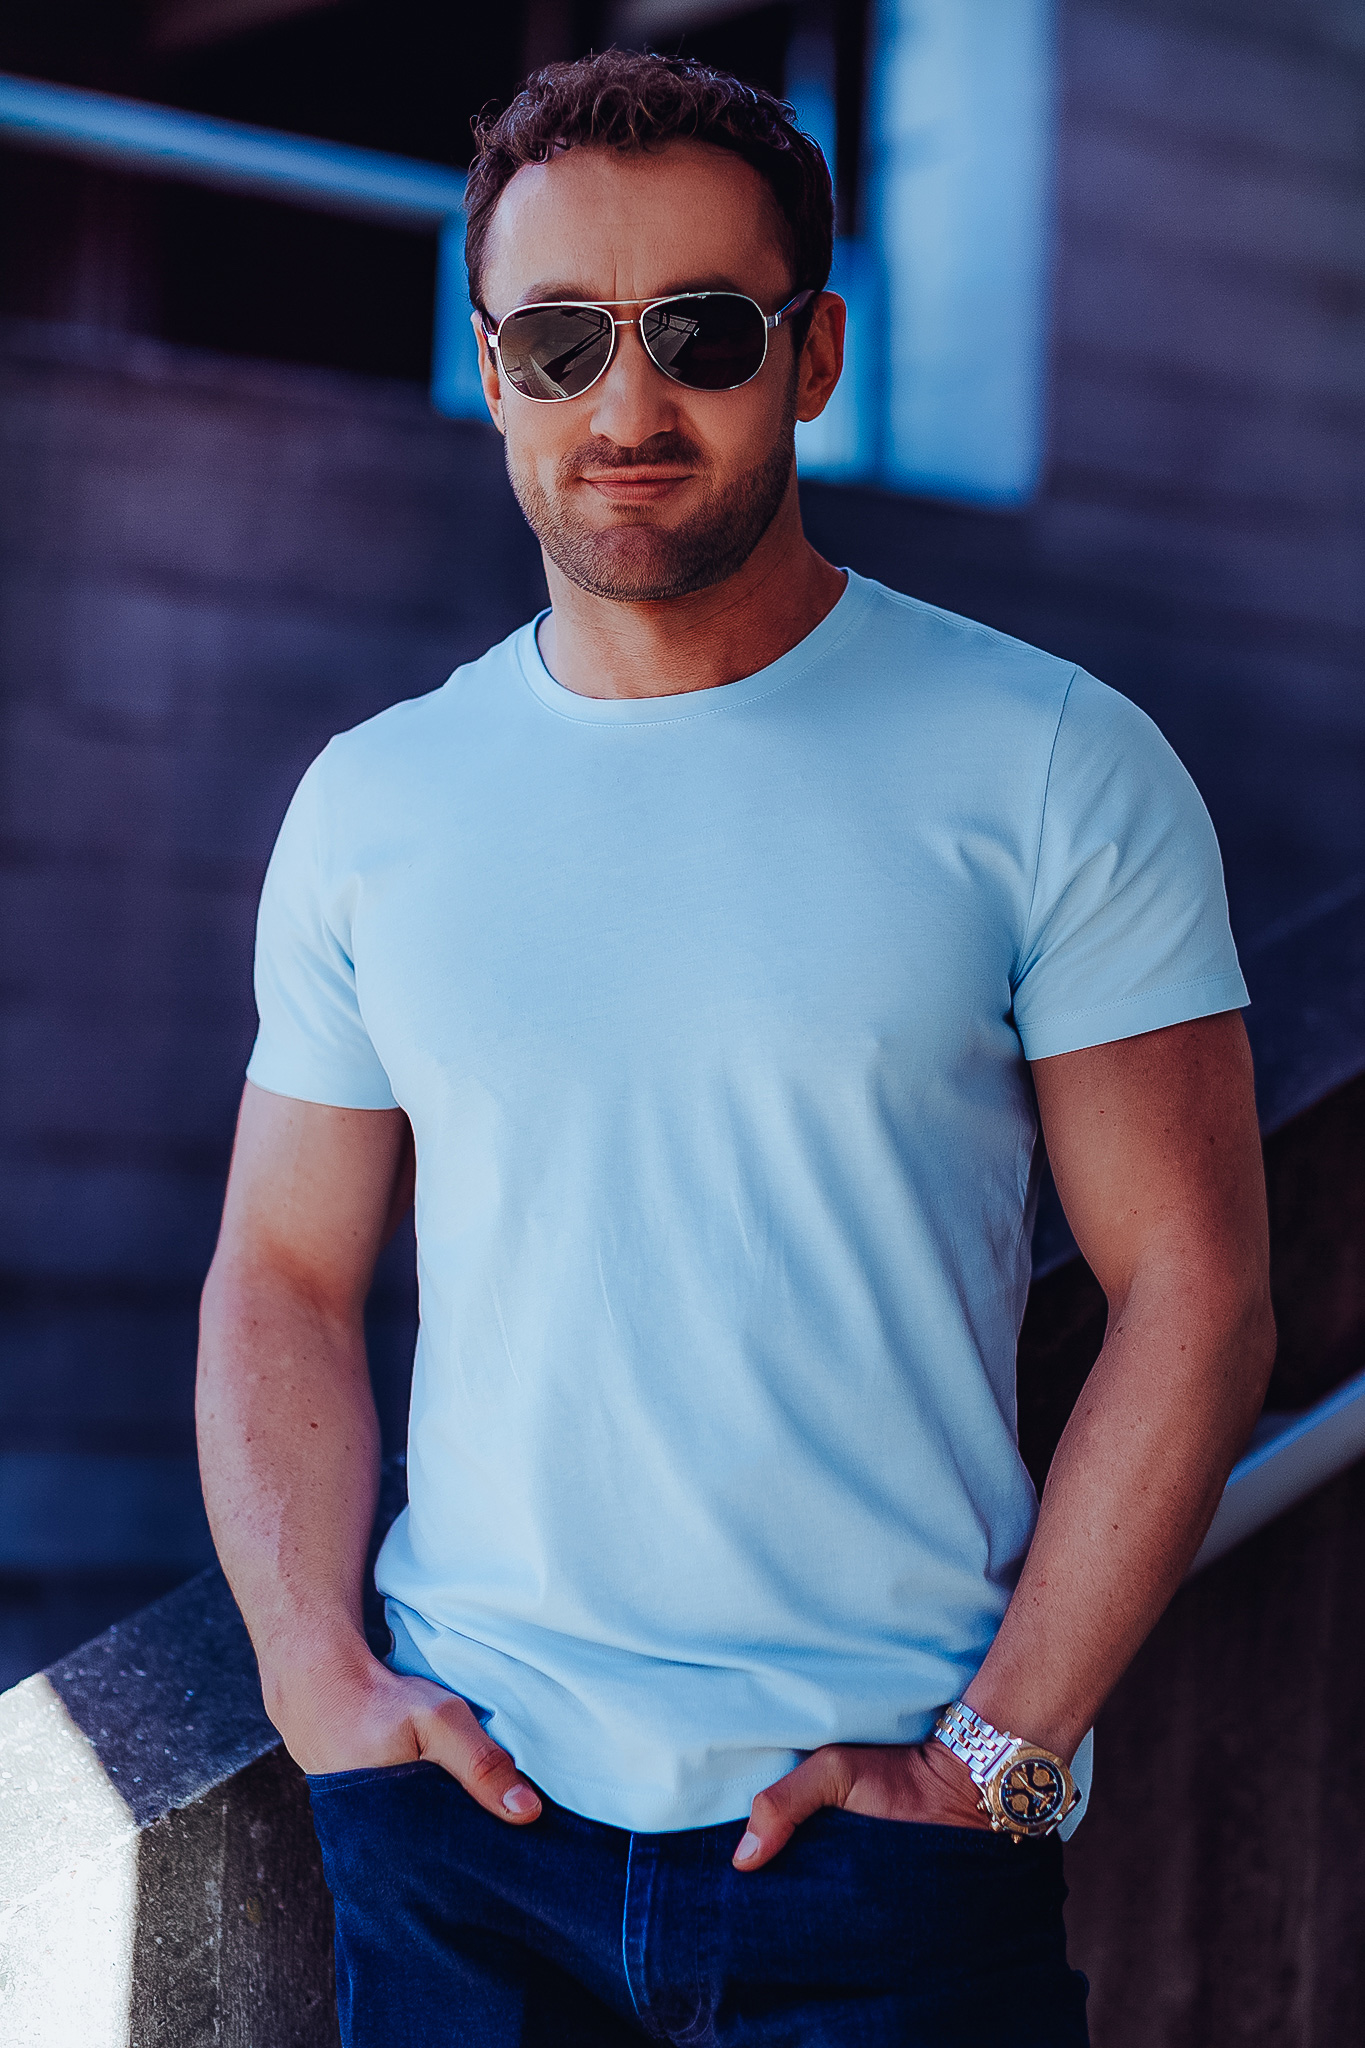 James Rostance in a light blue T Shirt with Sunglasses